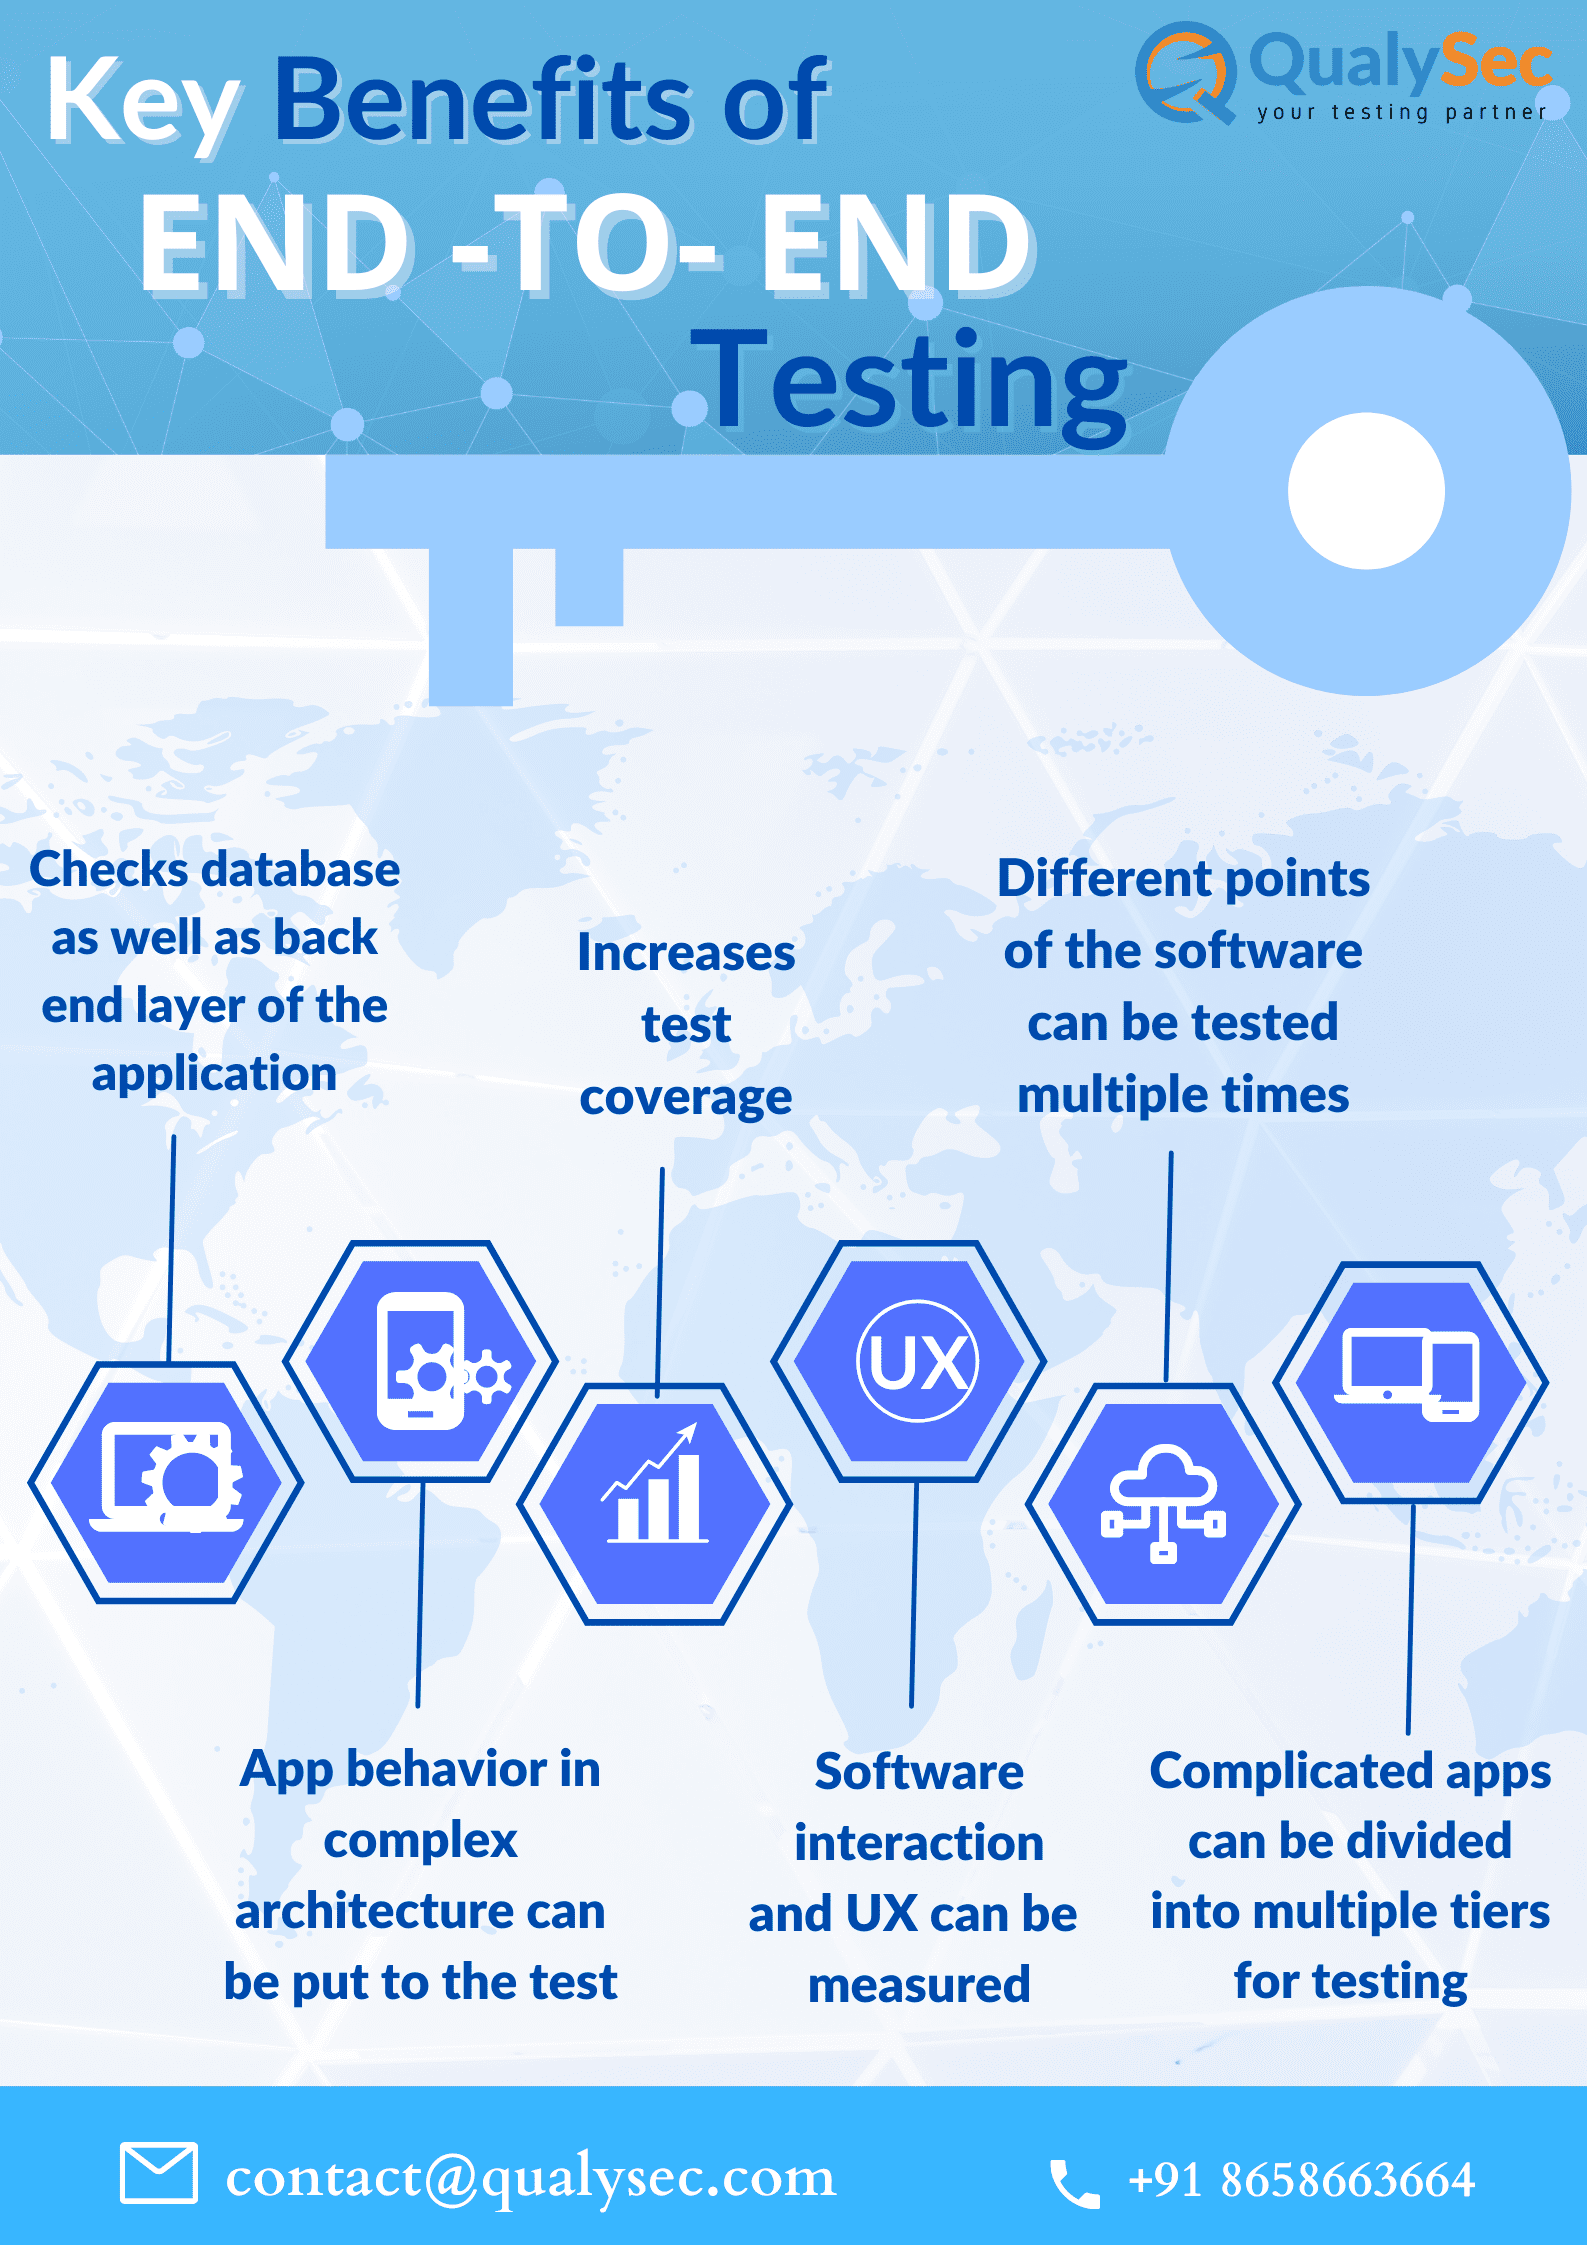 Key Benefits of End-to-End Testing